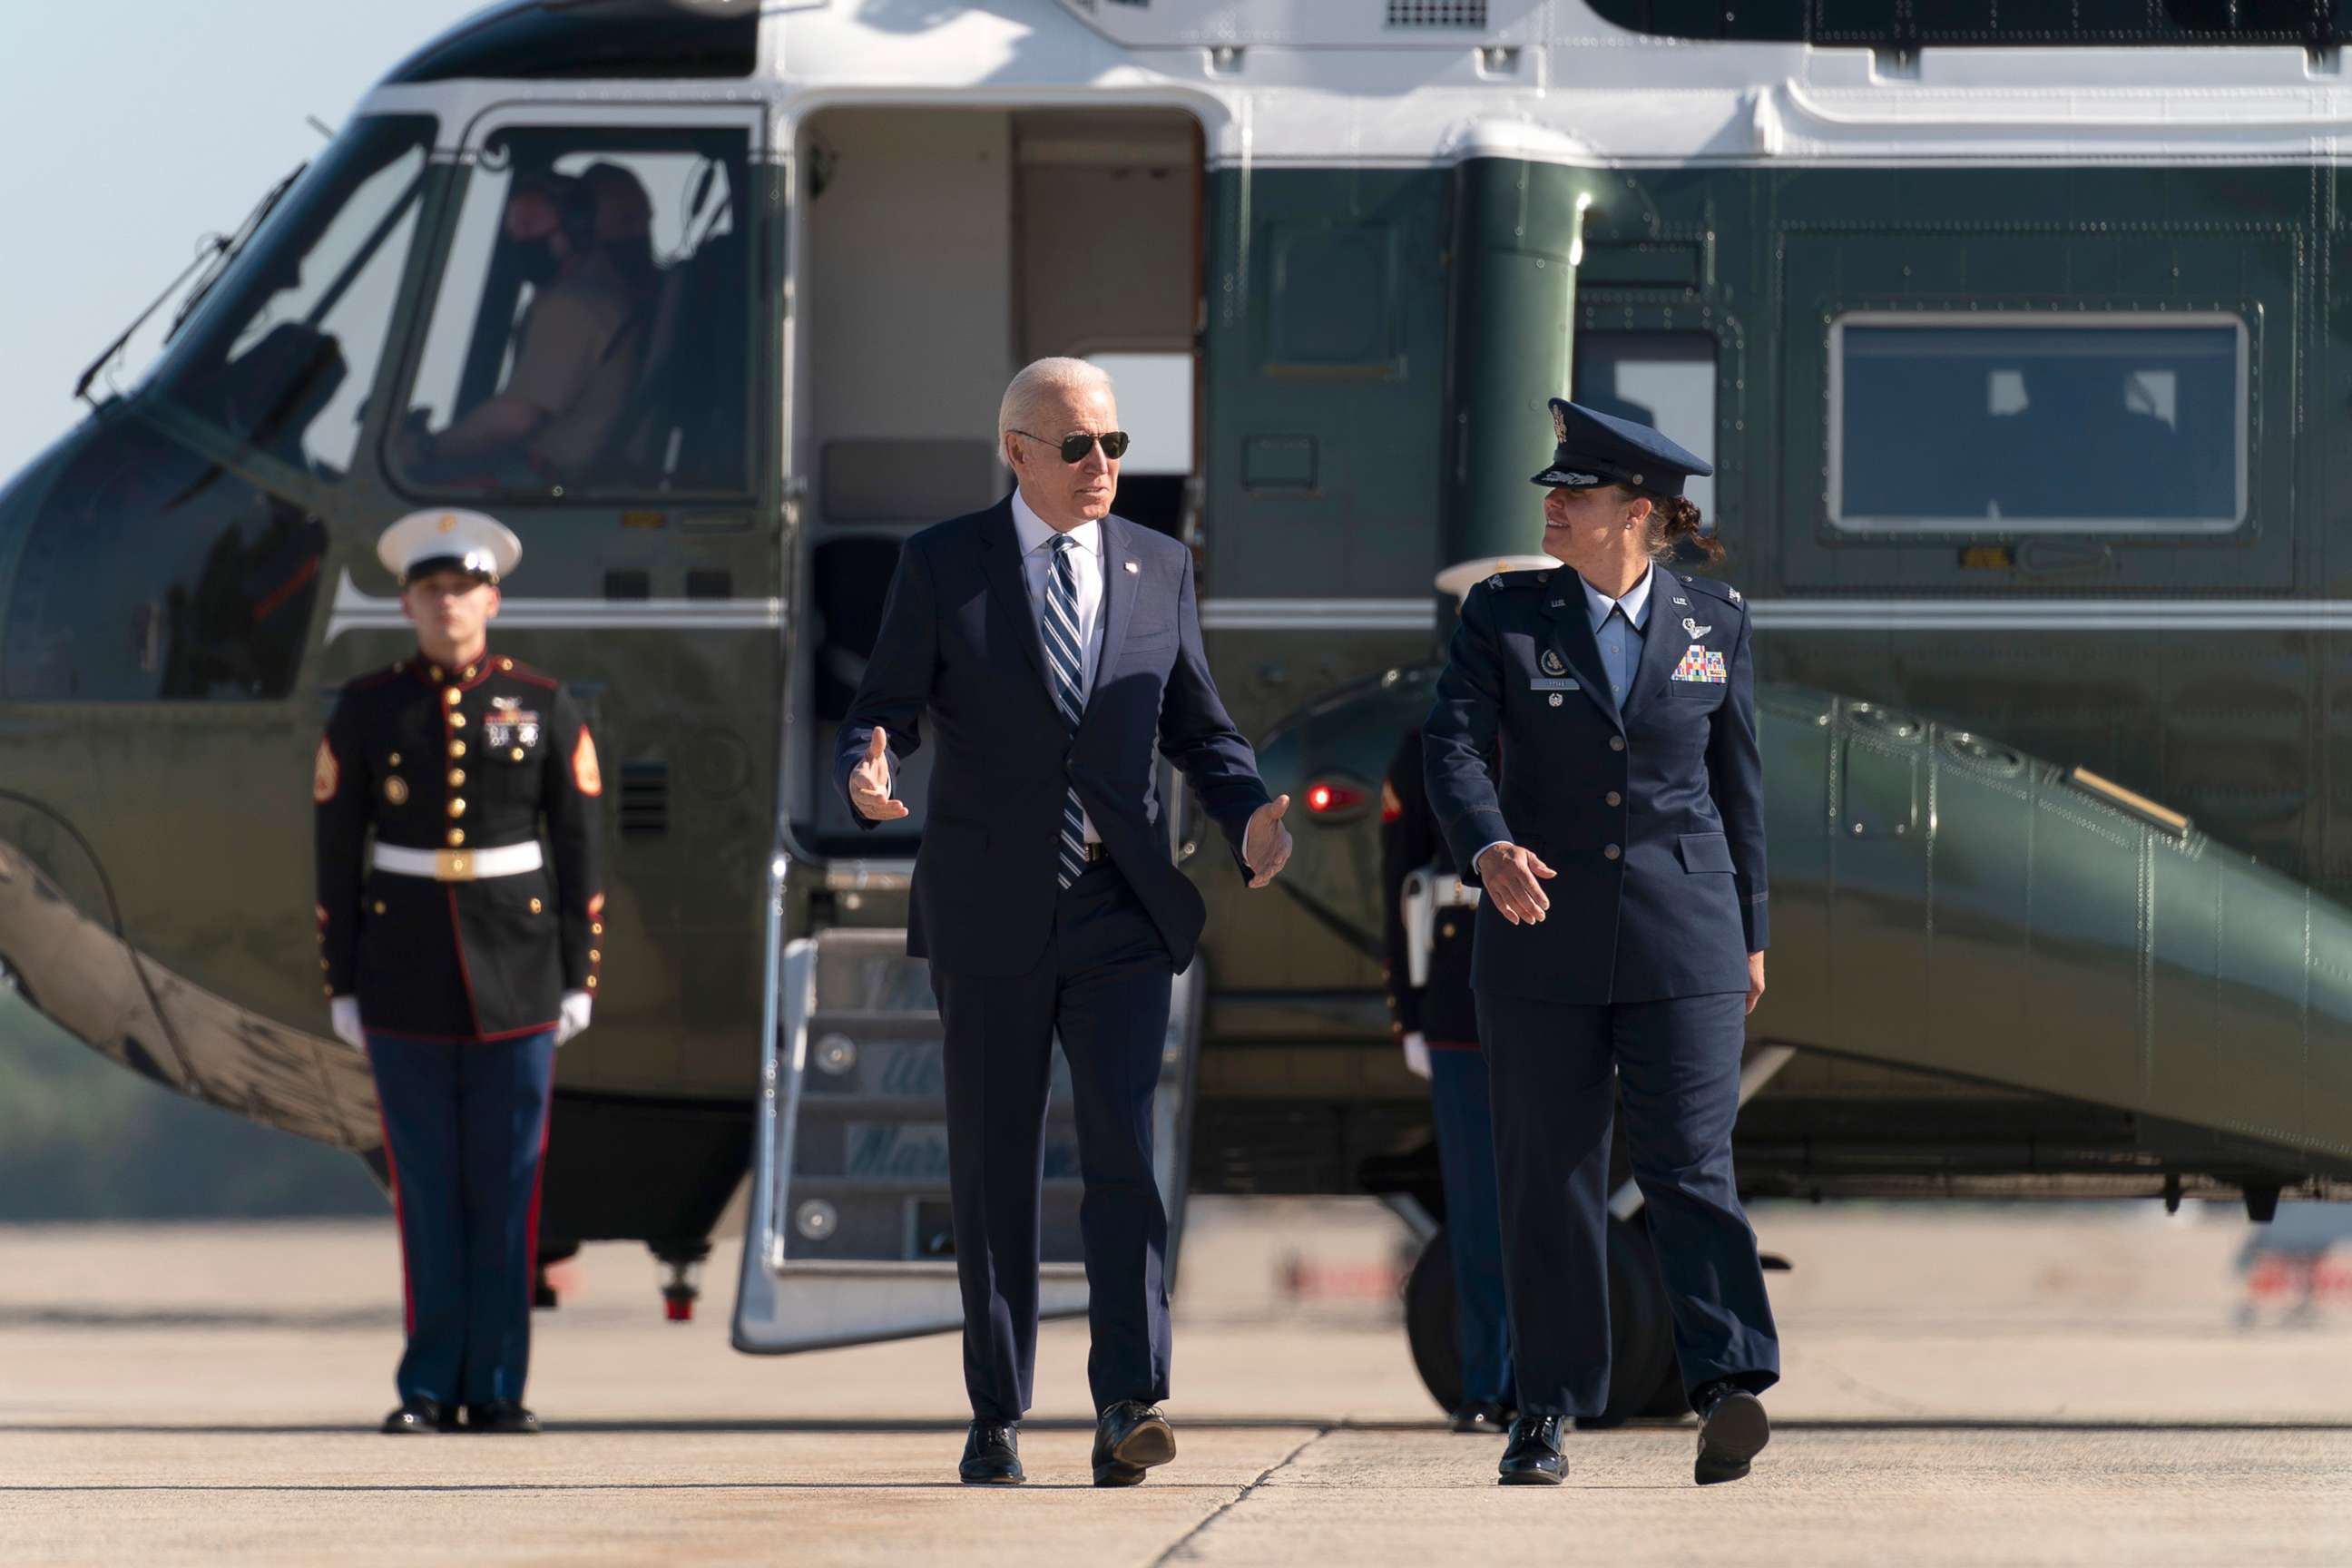 PHOTO: President Joe Biden arrives at Andrews Air Force Base, Md., May 19, 2021 en route to the commencement for the United States Coast Guard Academy in New London, Conn.